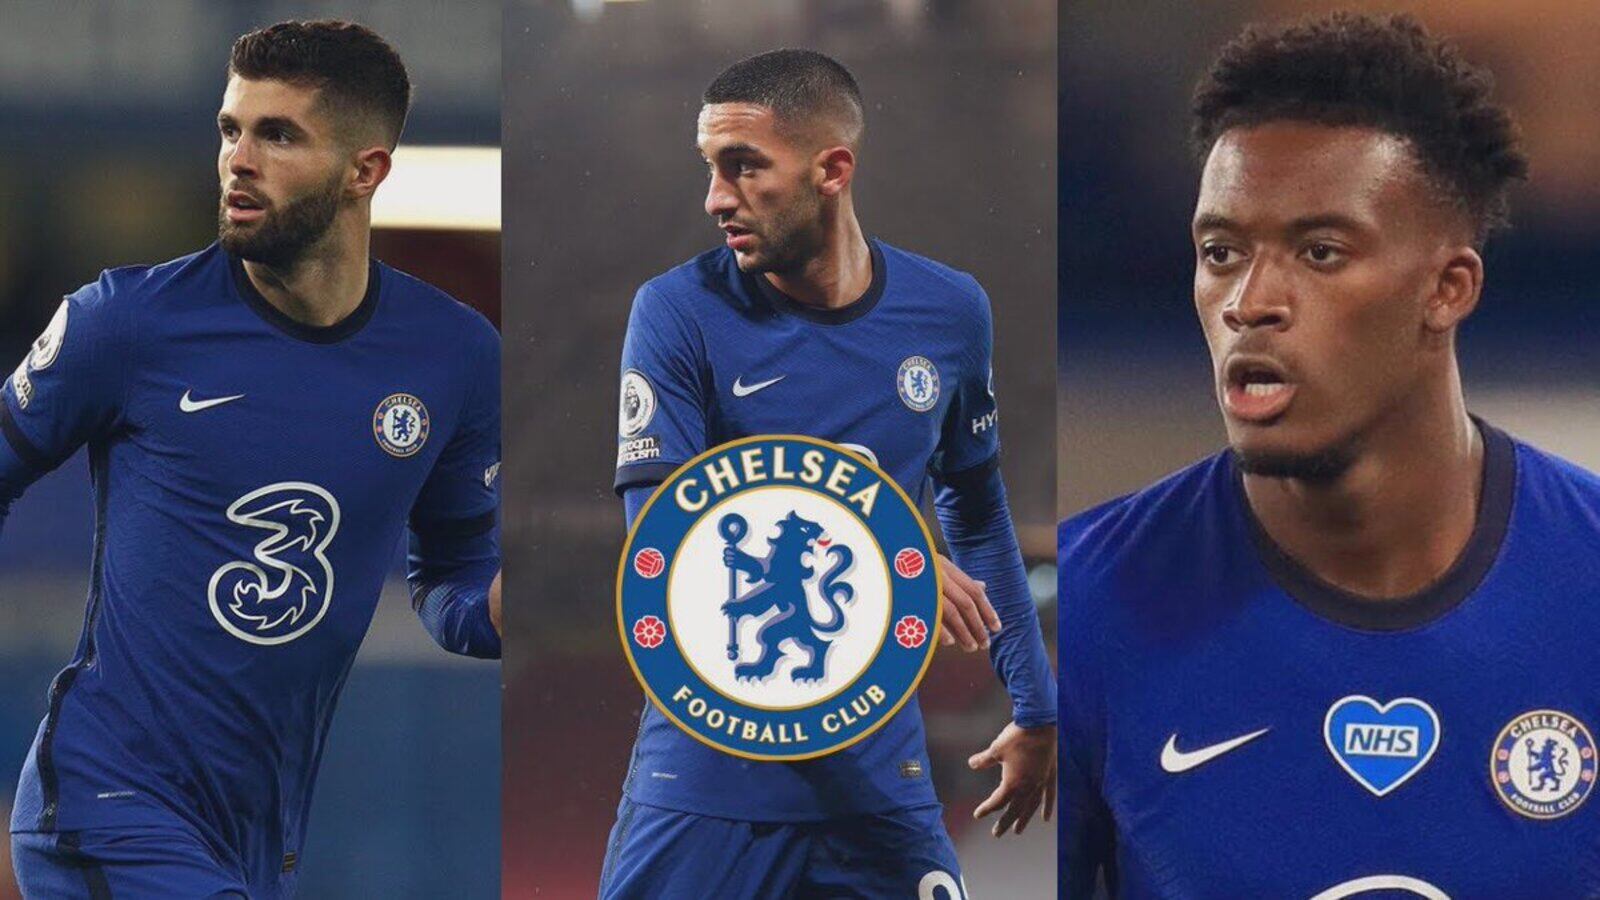 Three Chelsea players considered by Barcelona, what's their combined market value?